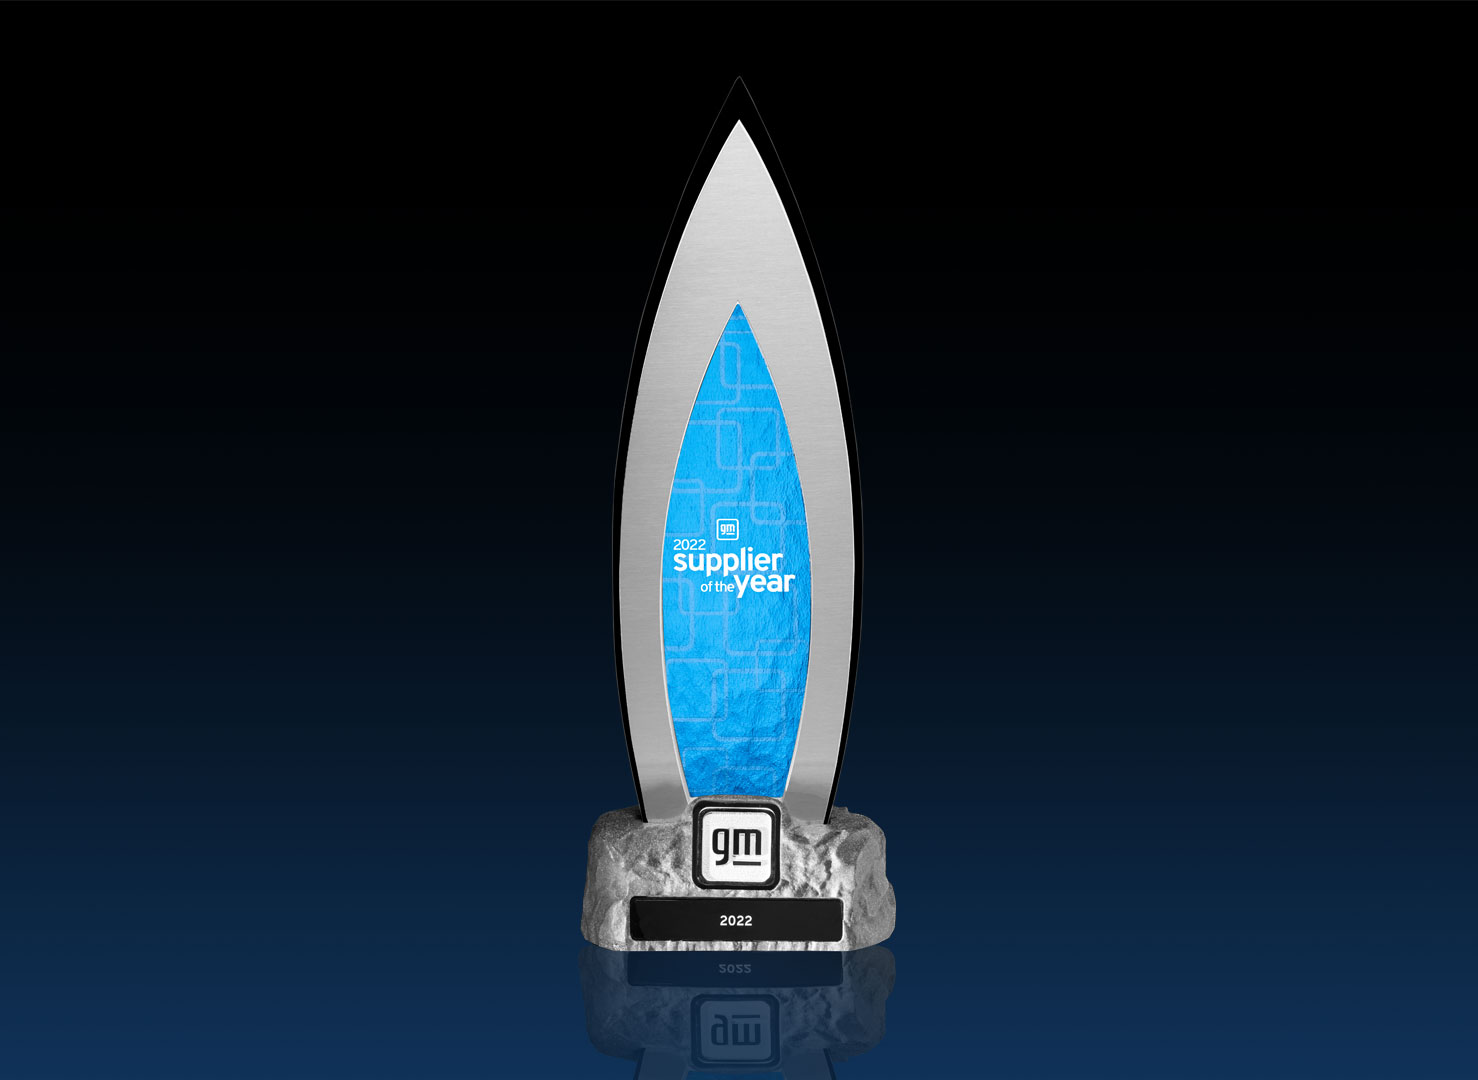 General Motors 2022 Supplier of the Year Trophy